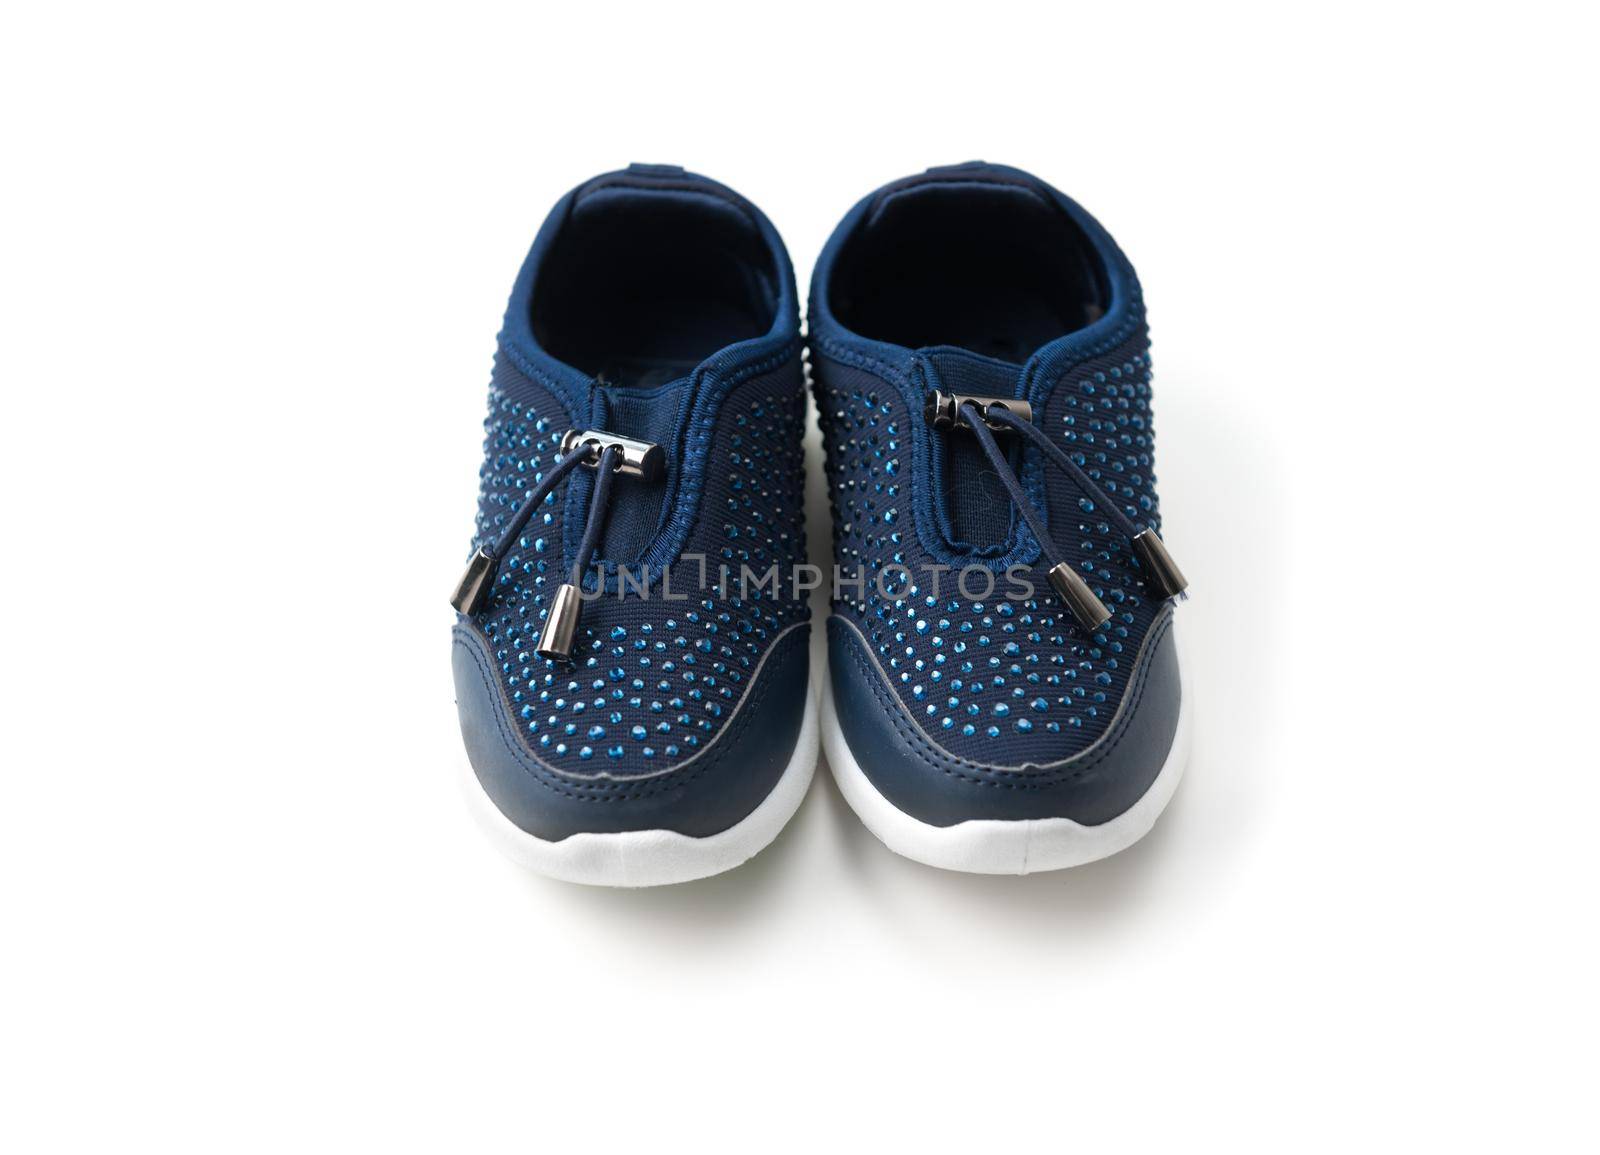 Dark blue sneakers with deep blue stones, white soles, comfy for running isolated on white background